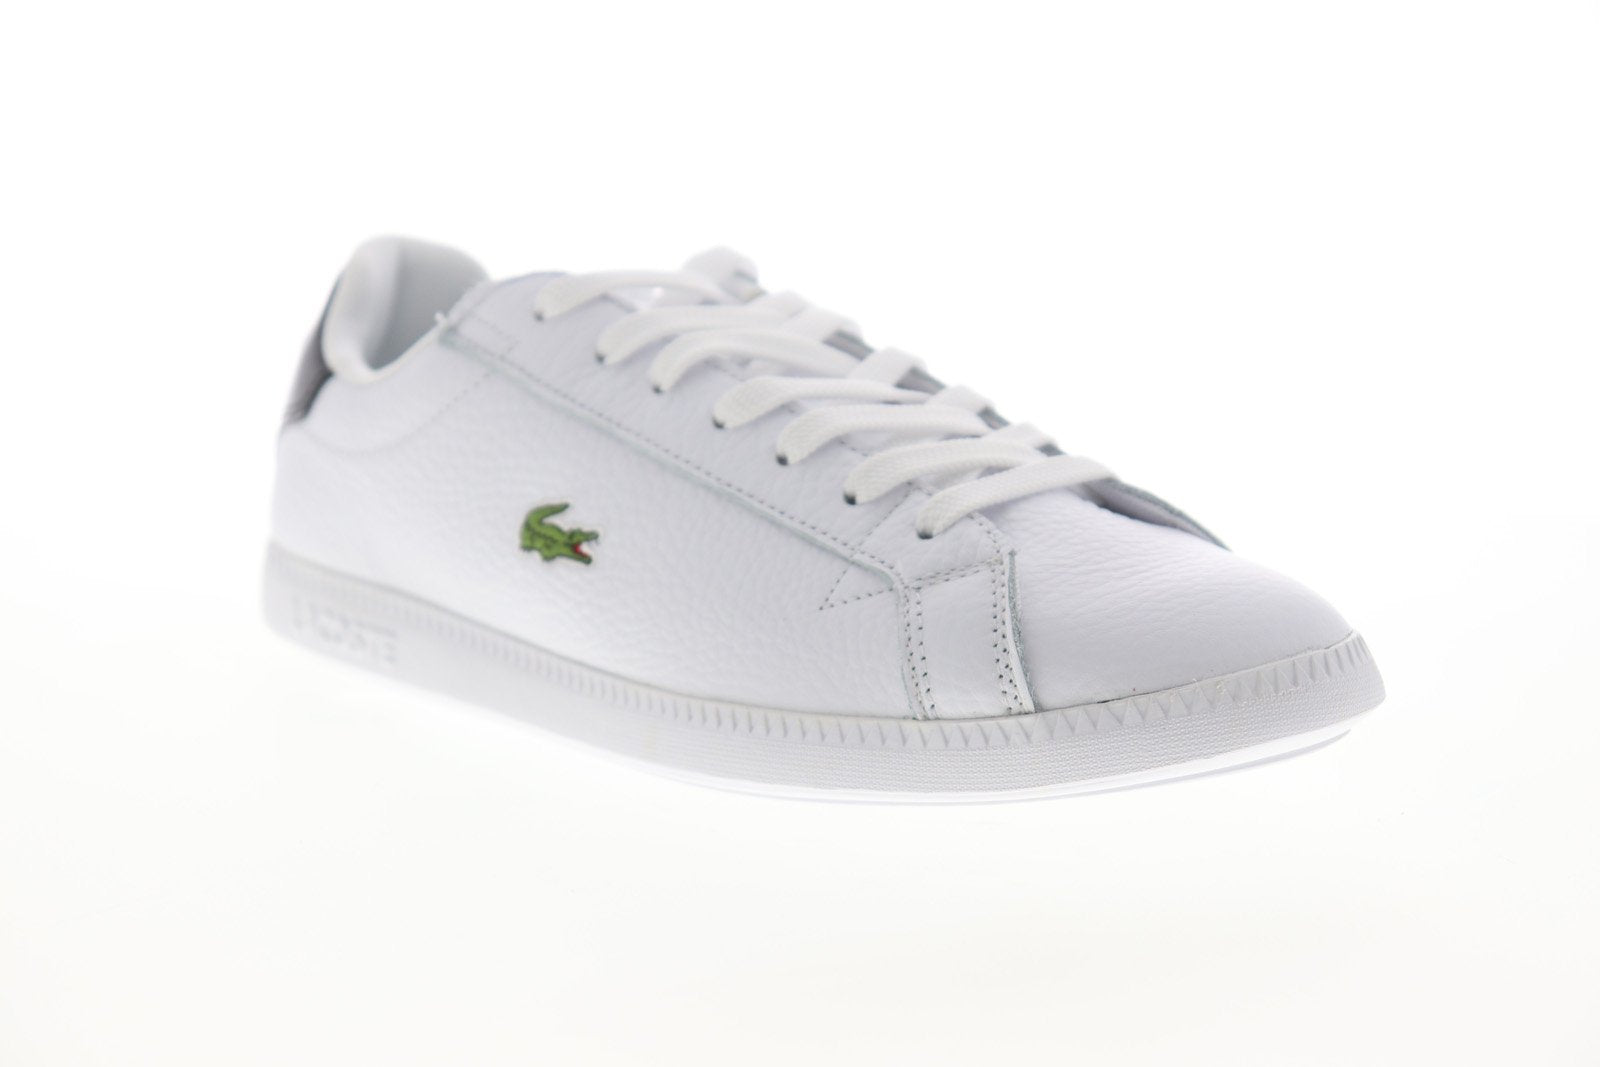 depositum pakke Veluddannet Lacoste Graduate 120 1 SMA Mens White Leather Lace Up Lifestyle Sneake -  Ruze Shoes